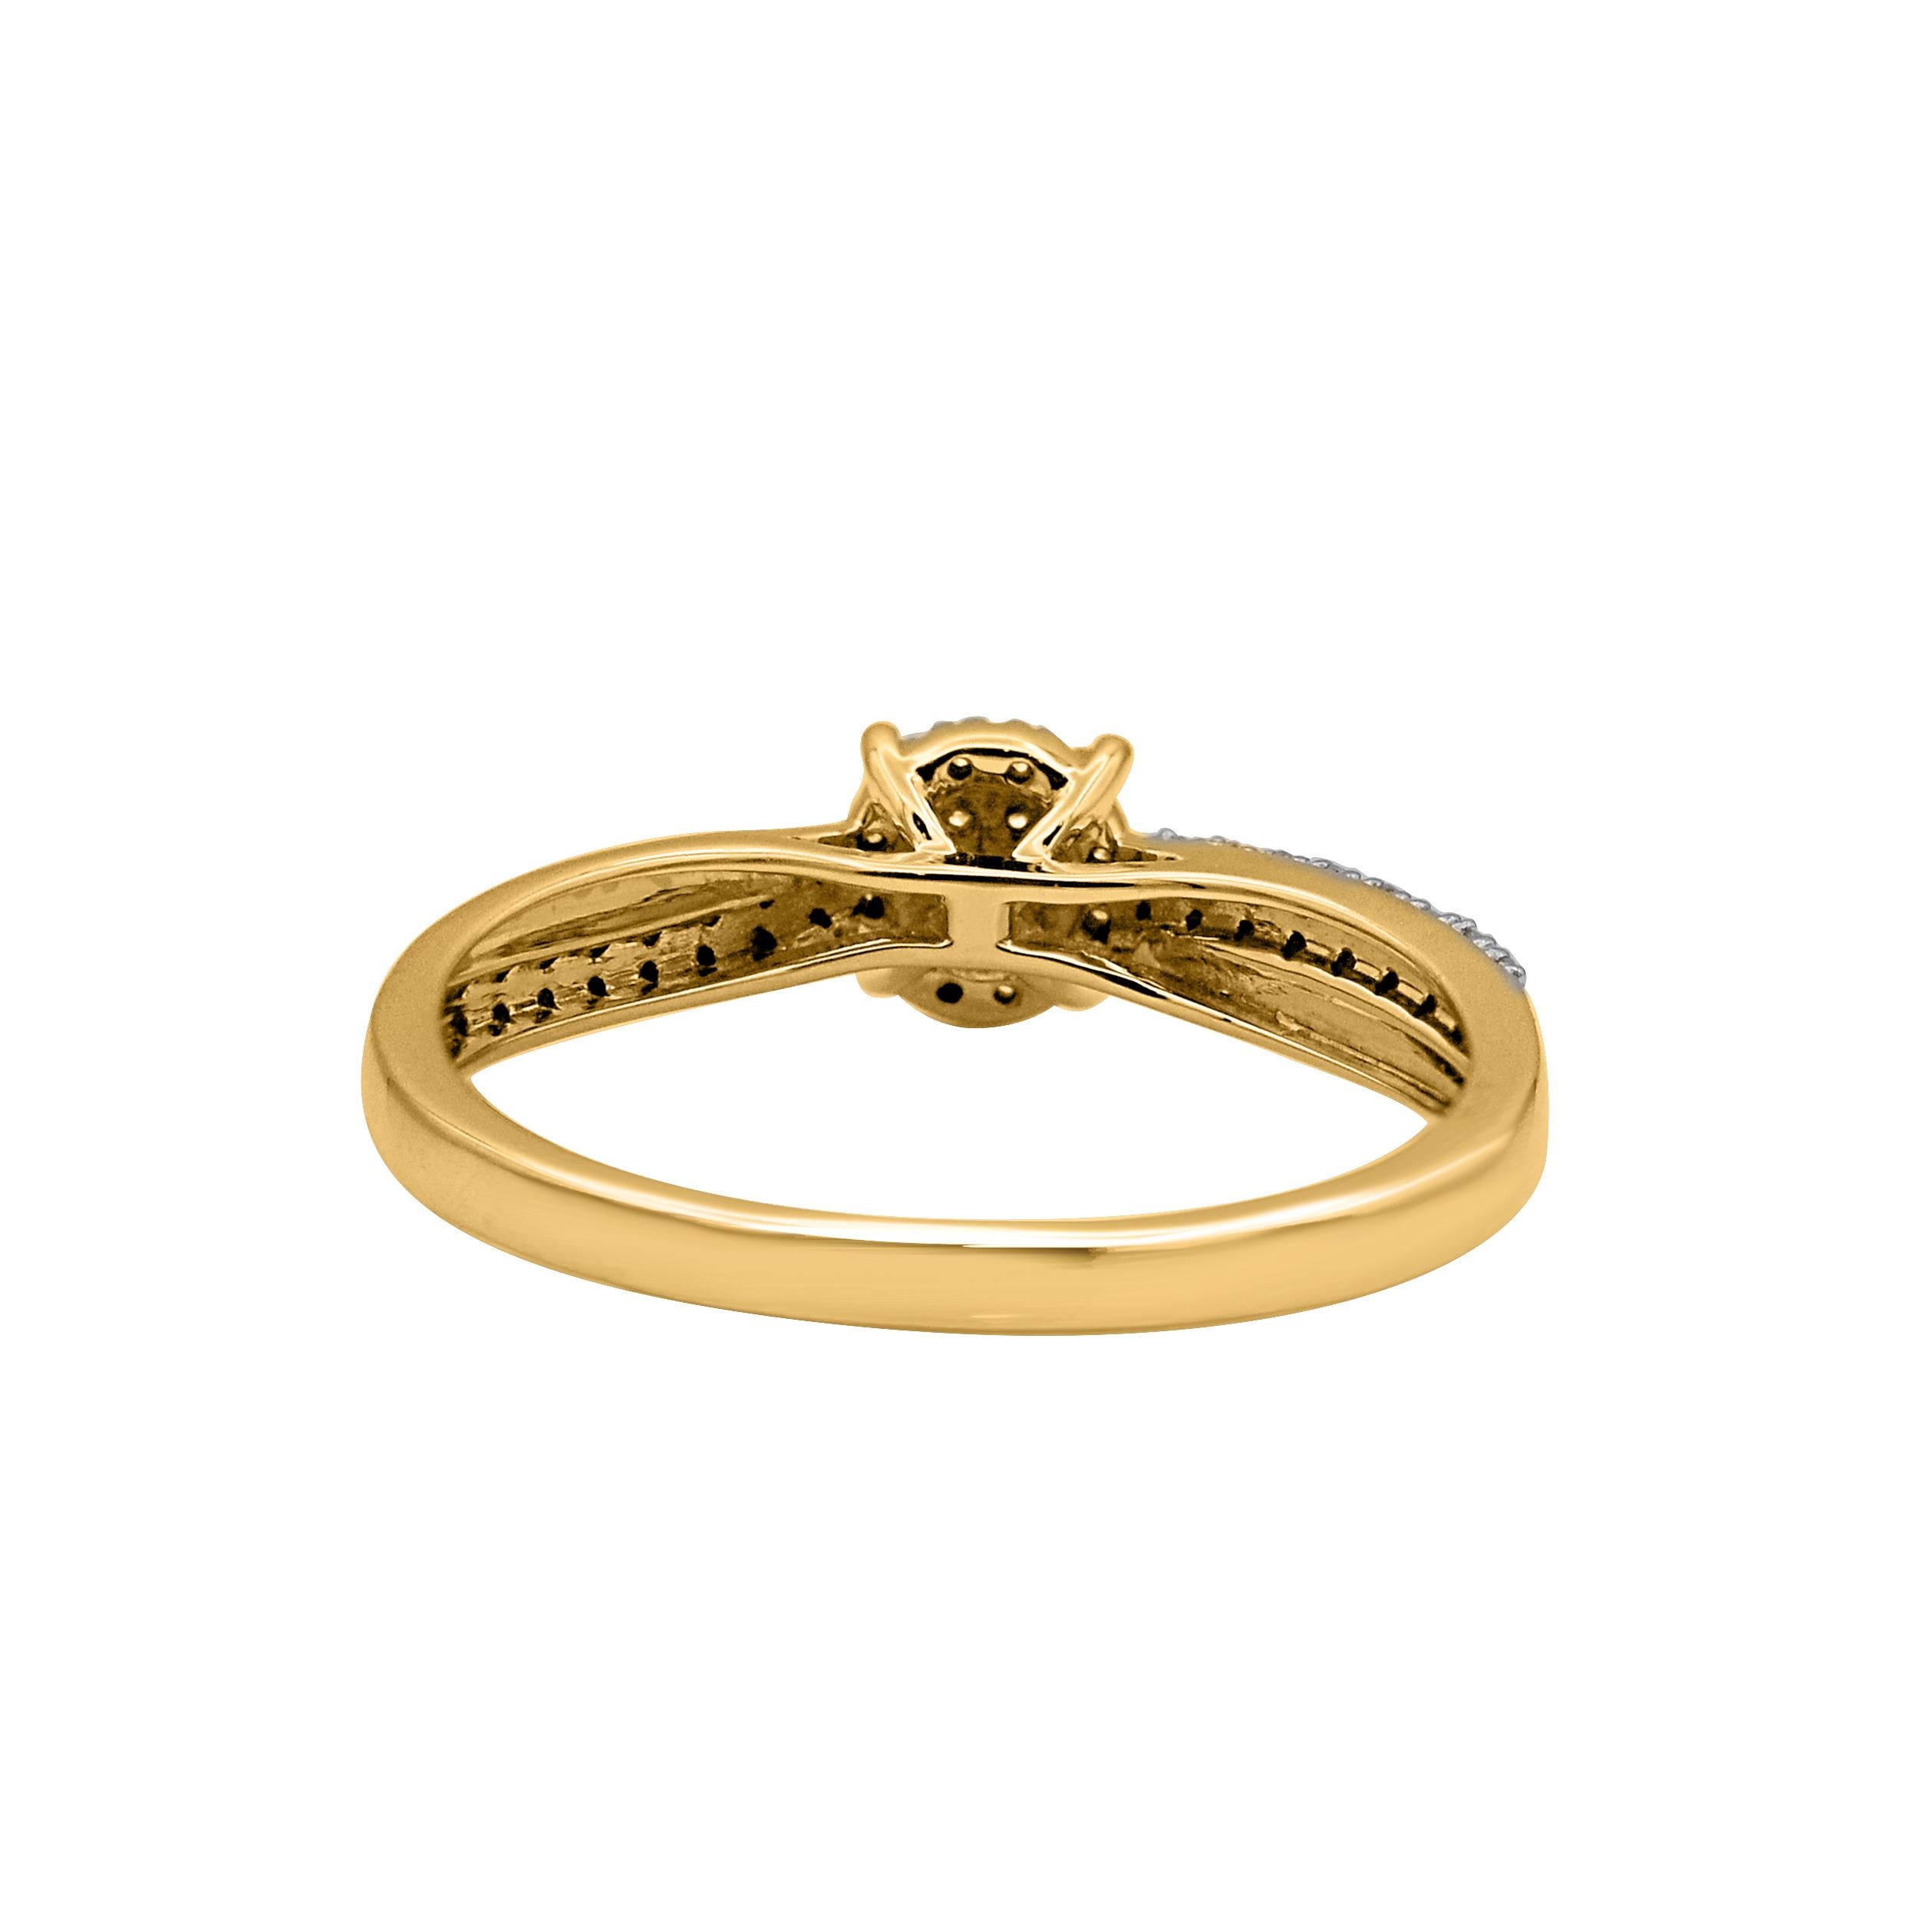 Round Cut TJD 0.15 Carat Natural Round Diamond Engagement Ring in 18KT Yellow Gold For Sale